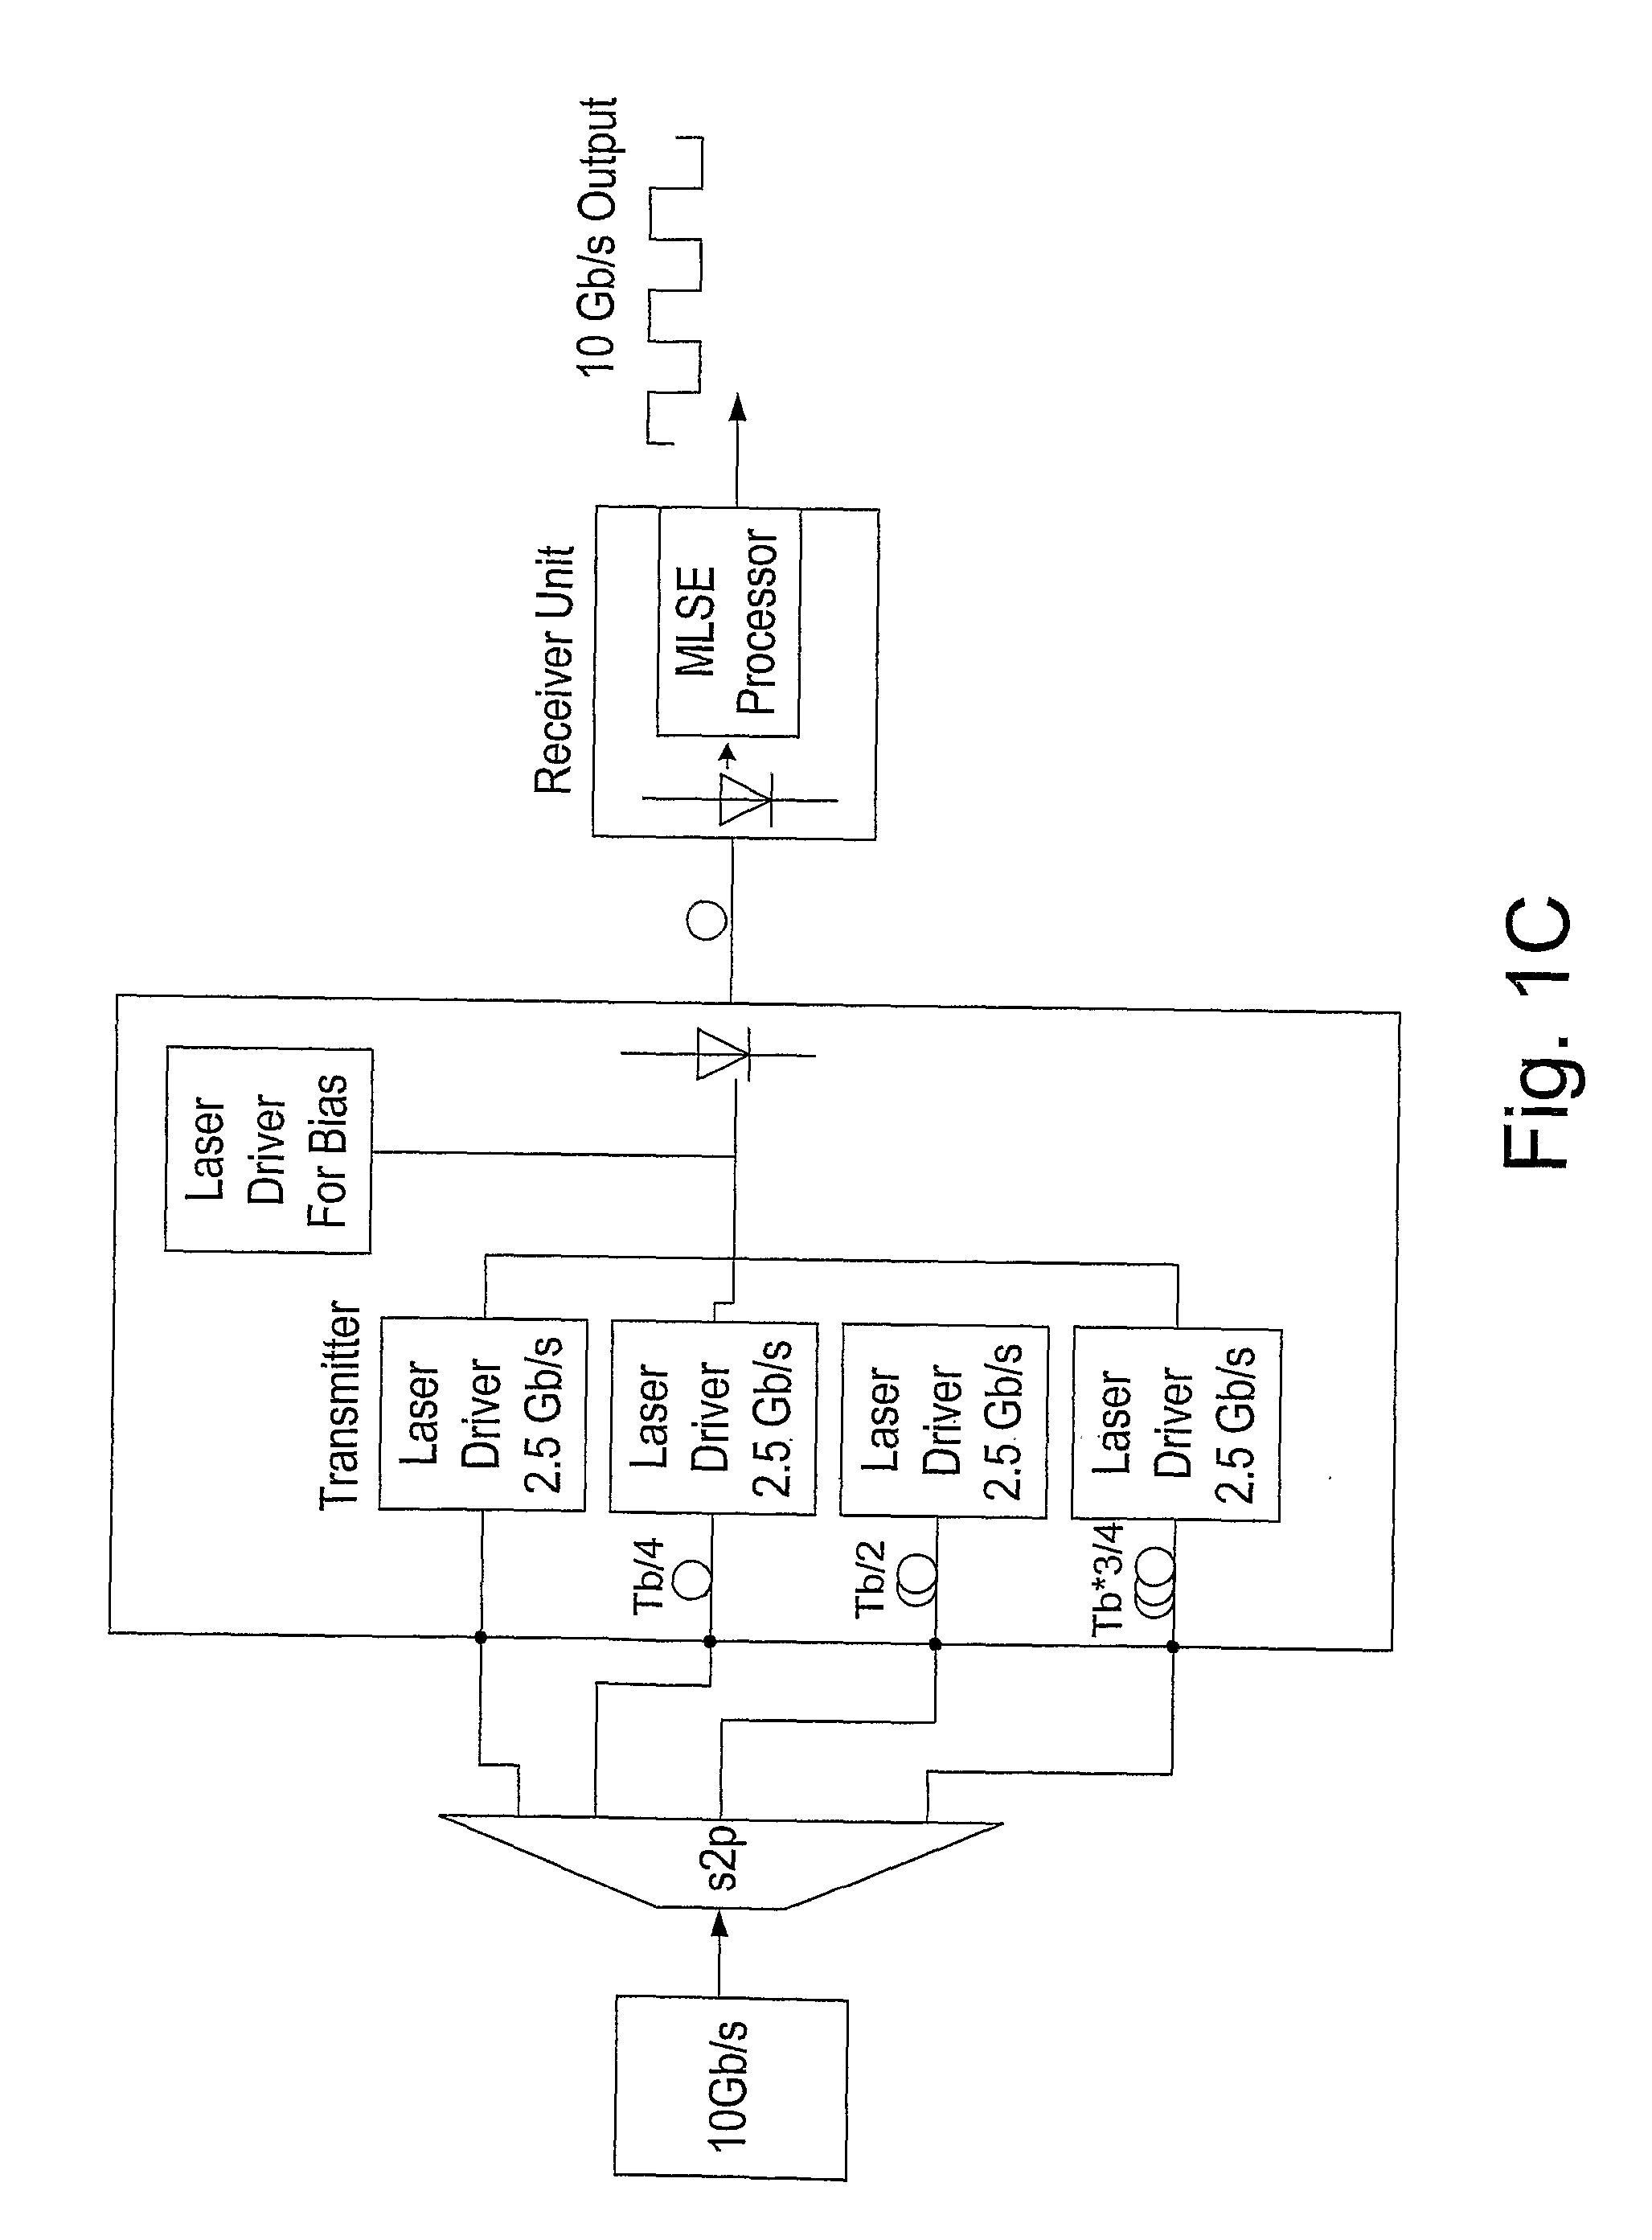 Method and Apparatus for Increasing the Capacity of A Data Communication Channel